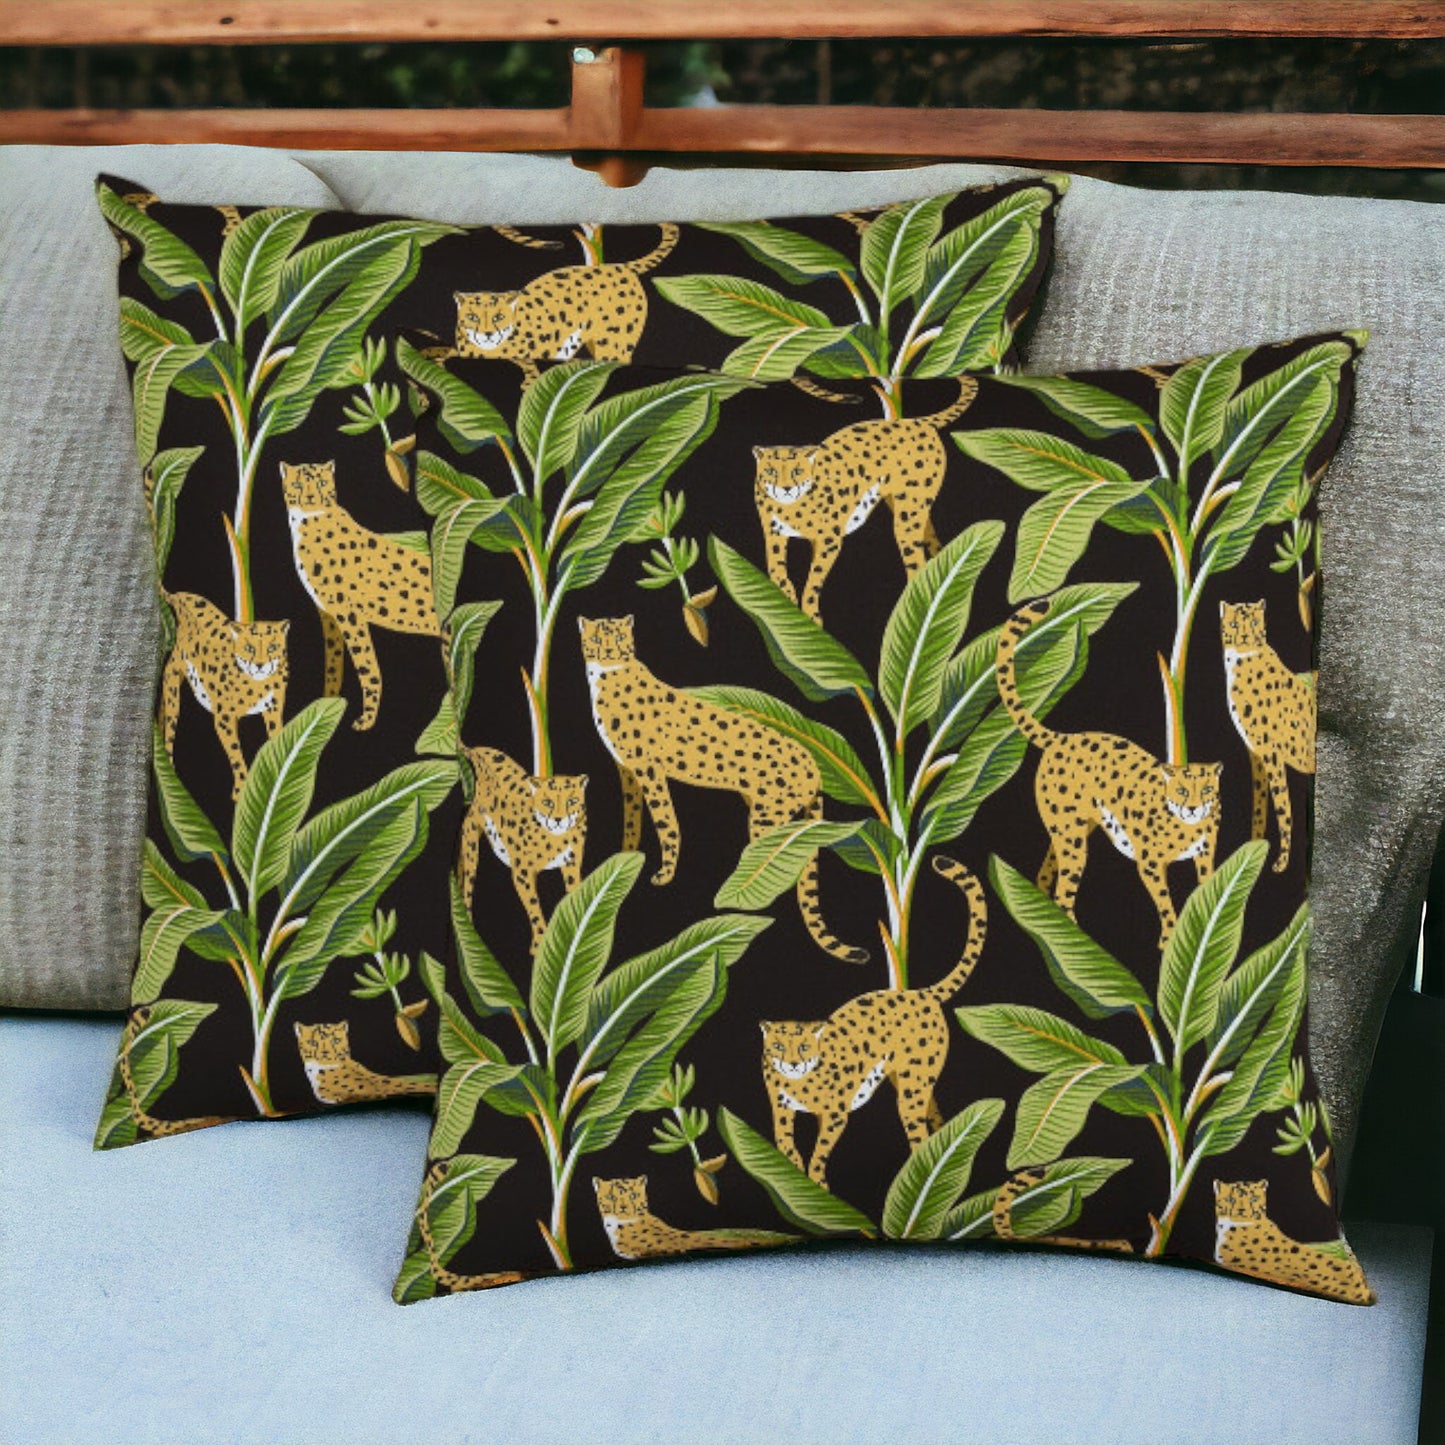 Set of Two 22" X 22" Green and Black Indoor Outdoor Throw Pillow Cover & Insert